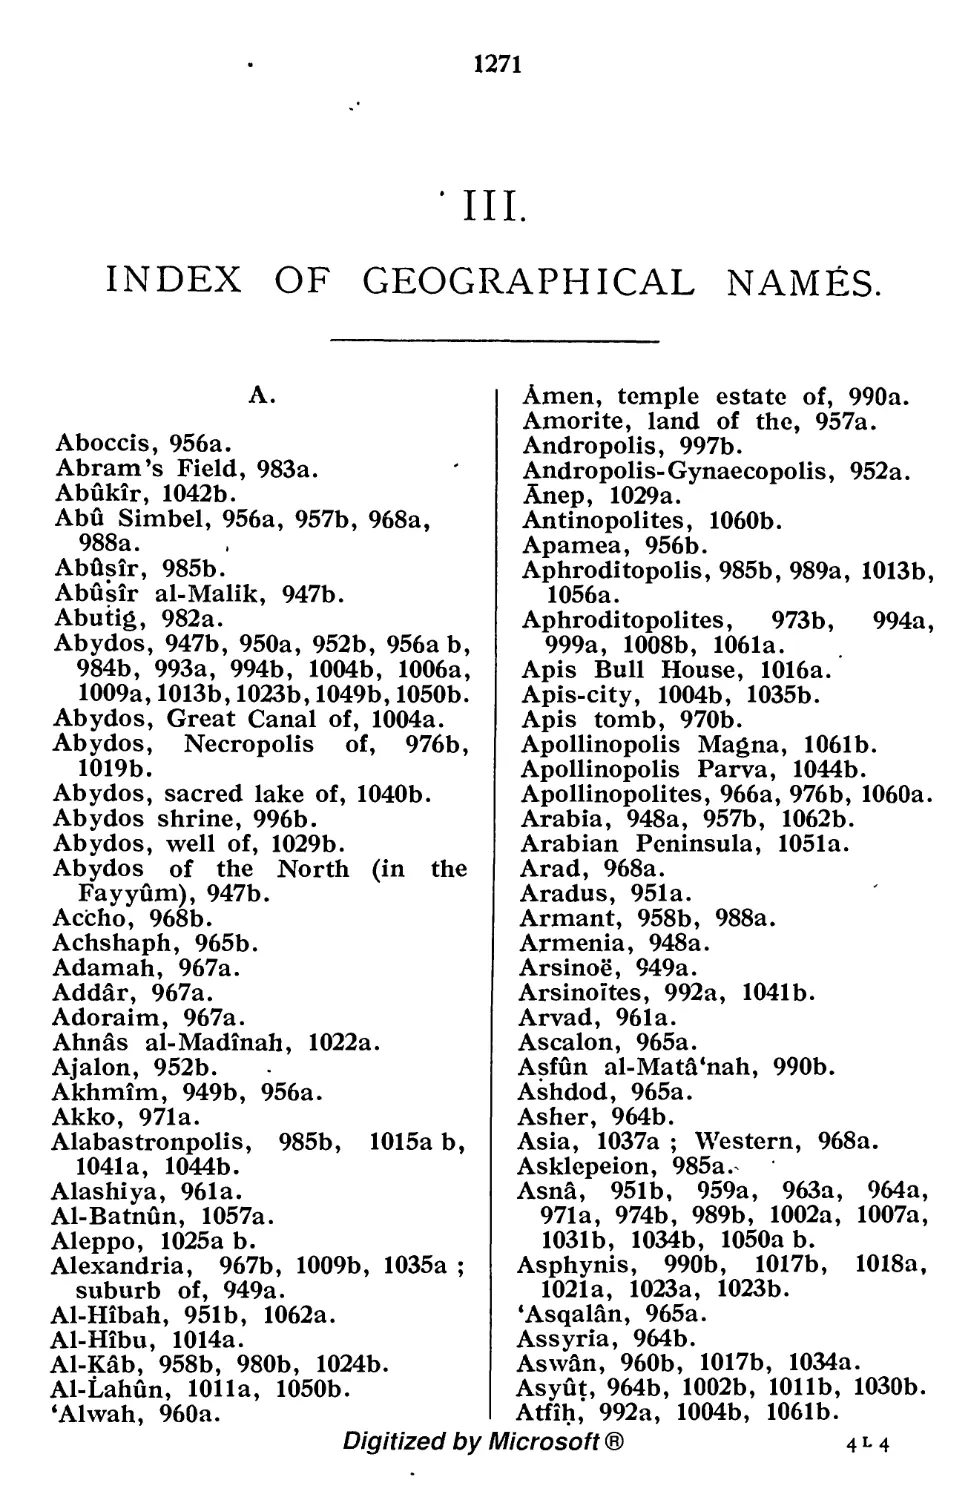 Index of Geographical Names